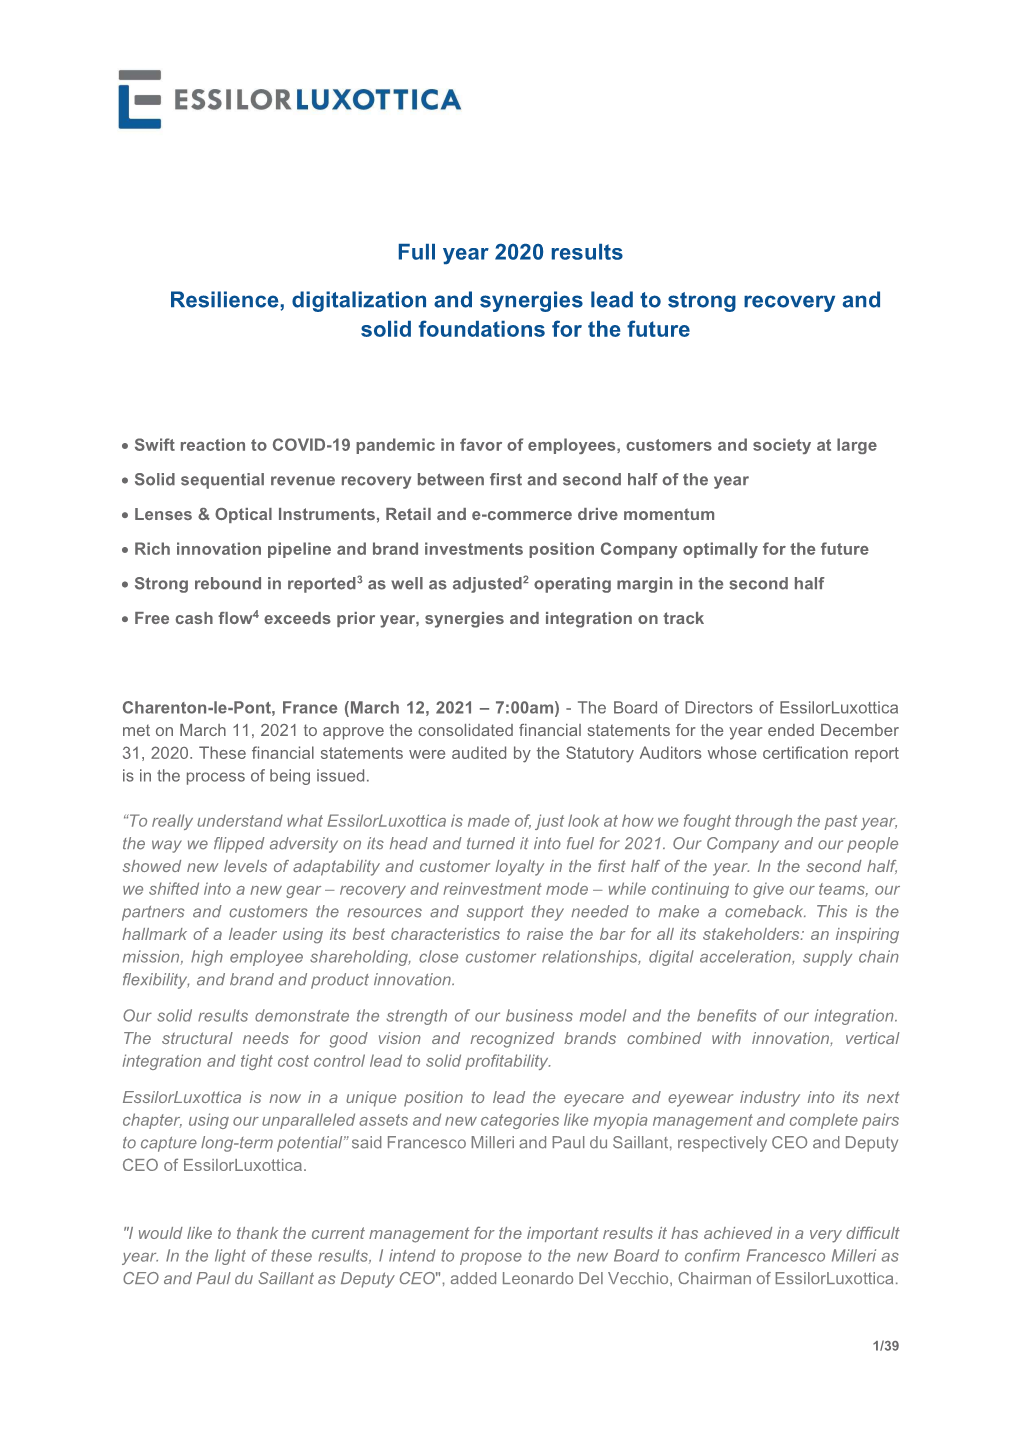 Full Year 2020 Results Resilience, Digitalization and Synergies Lead To